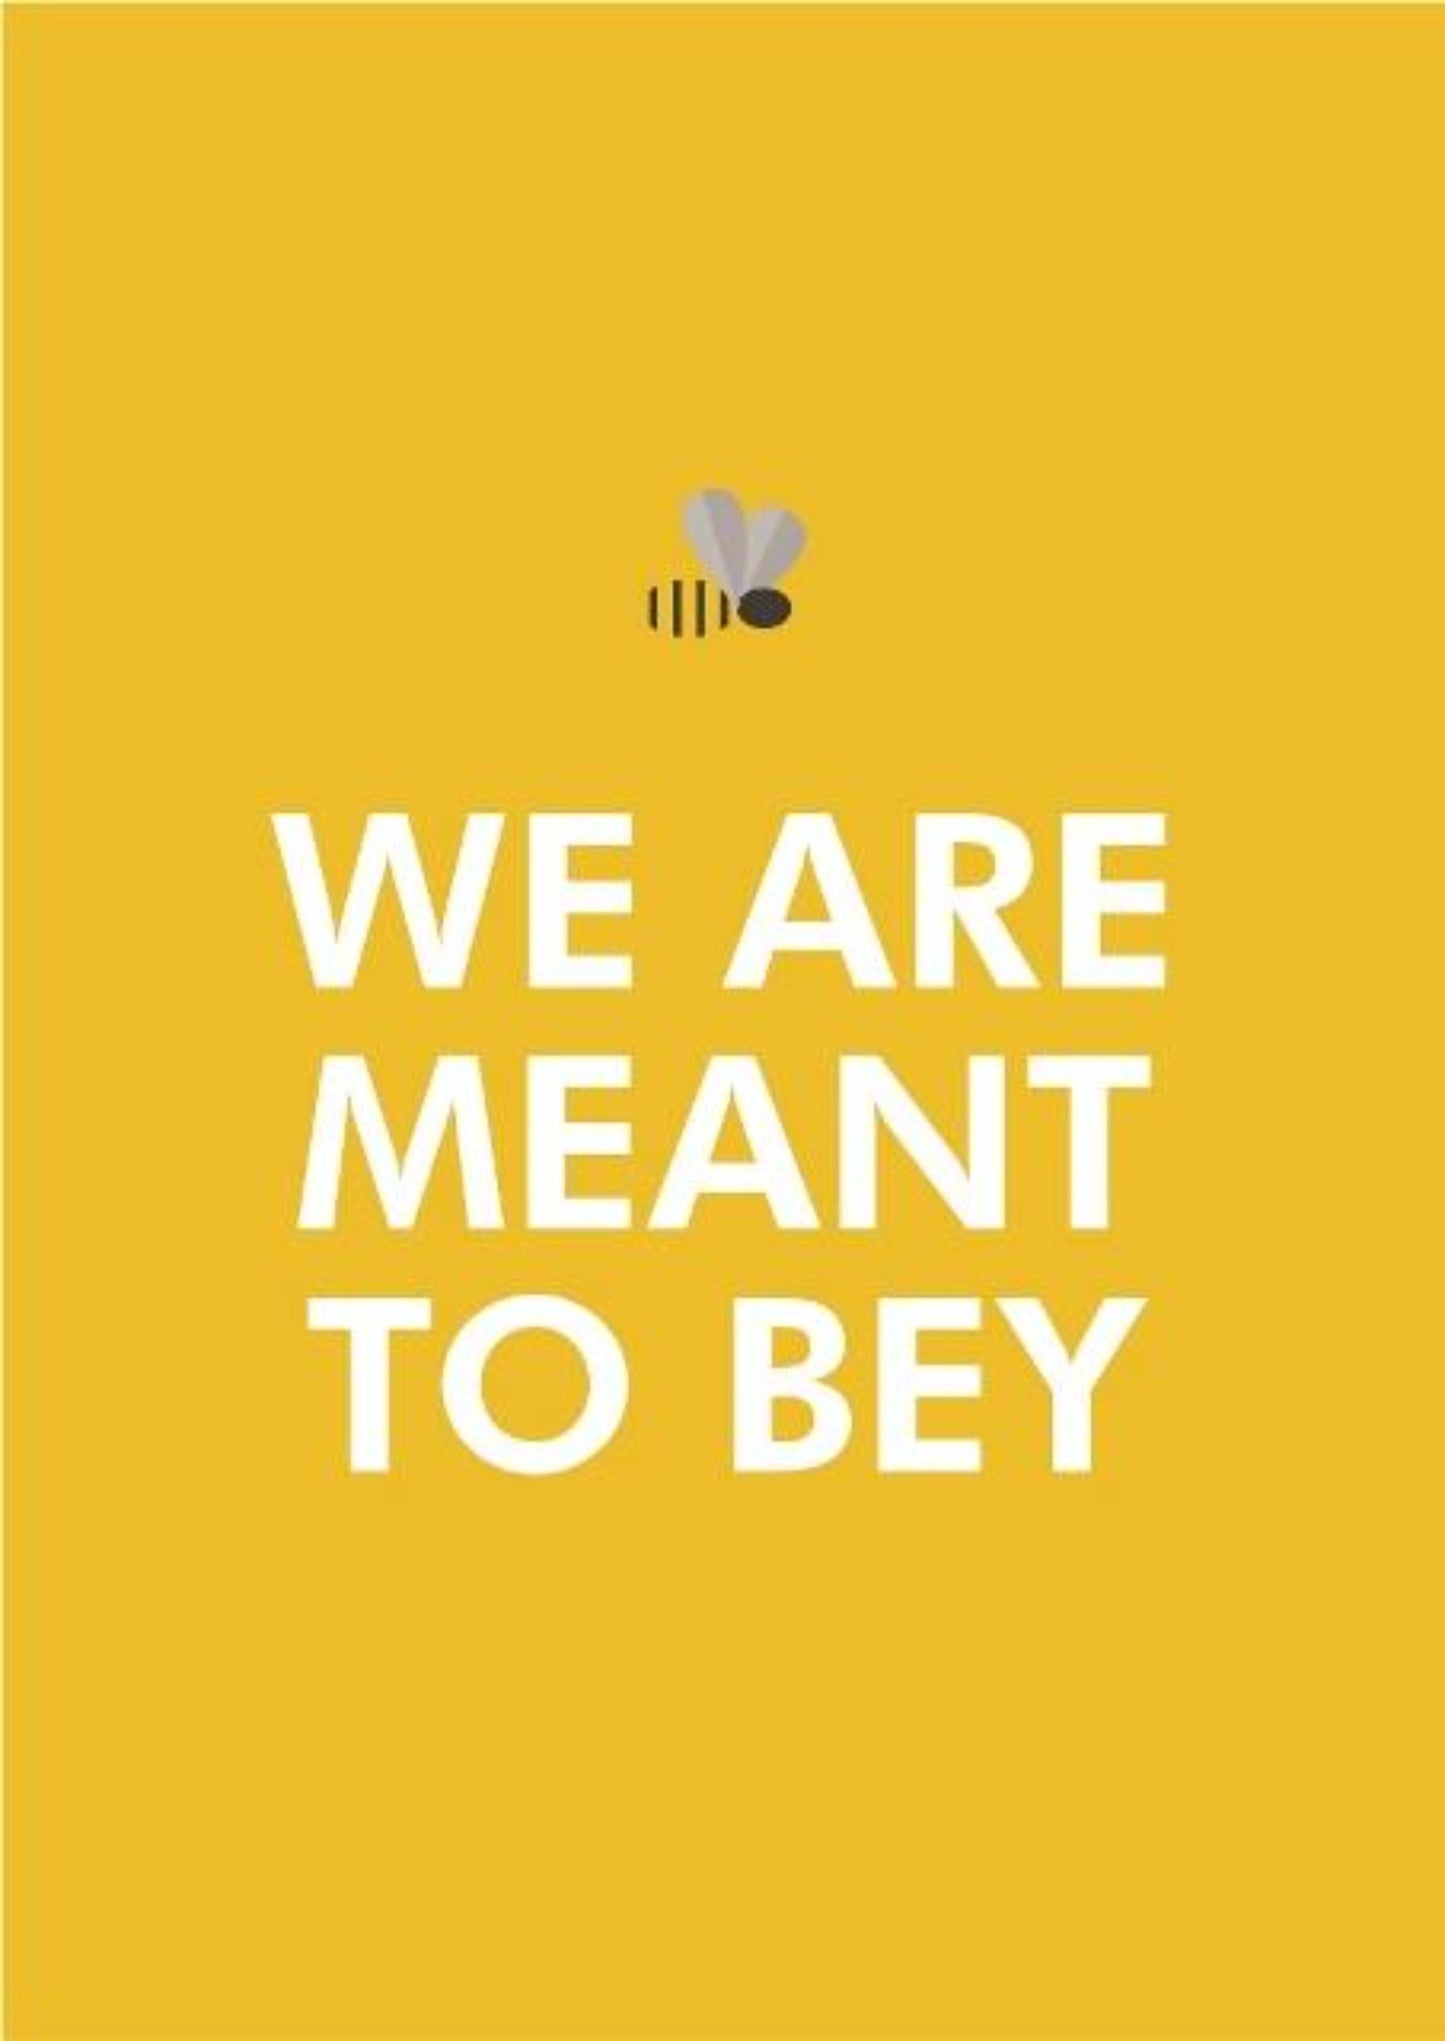 We Are Meant To Bey.